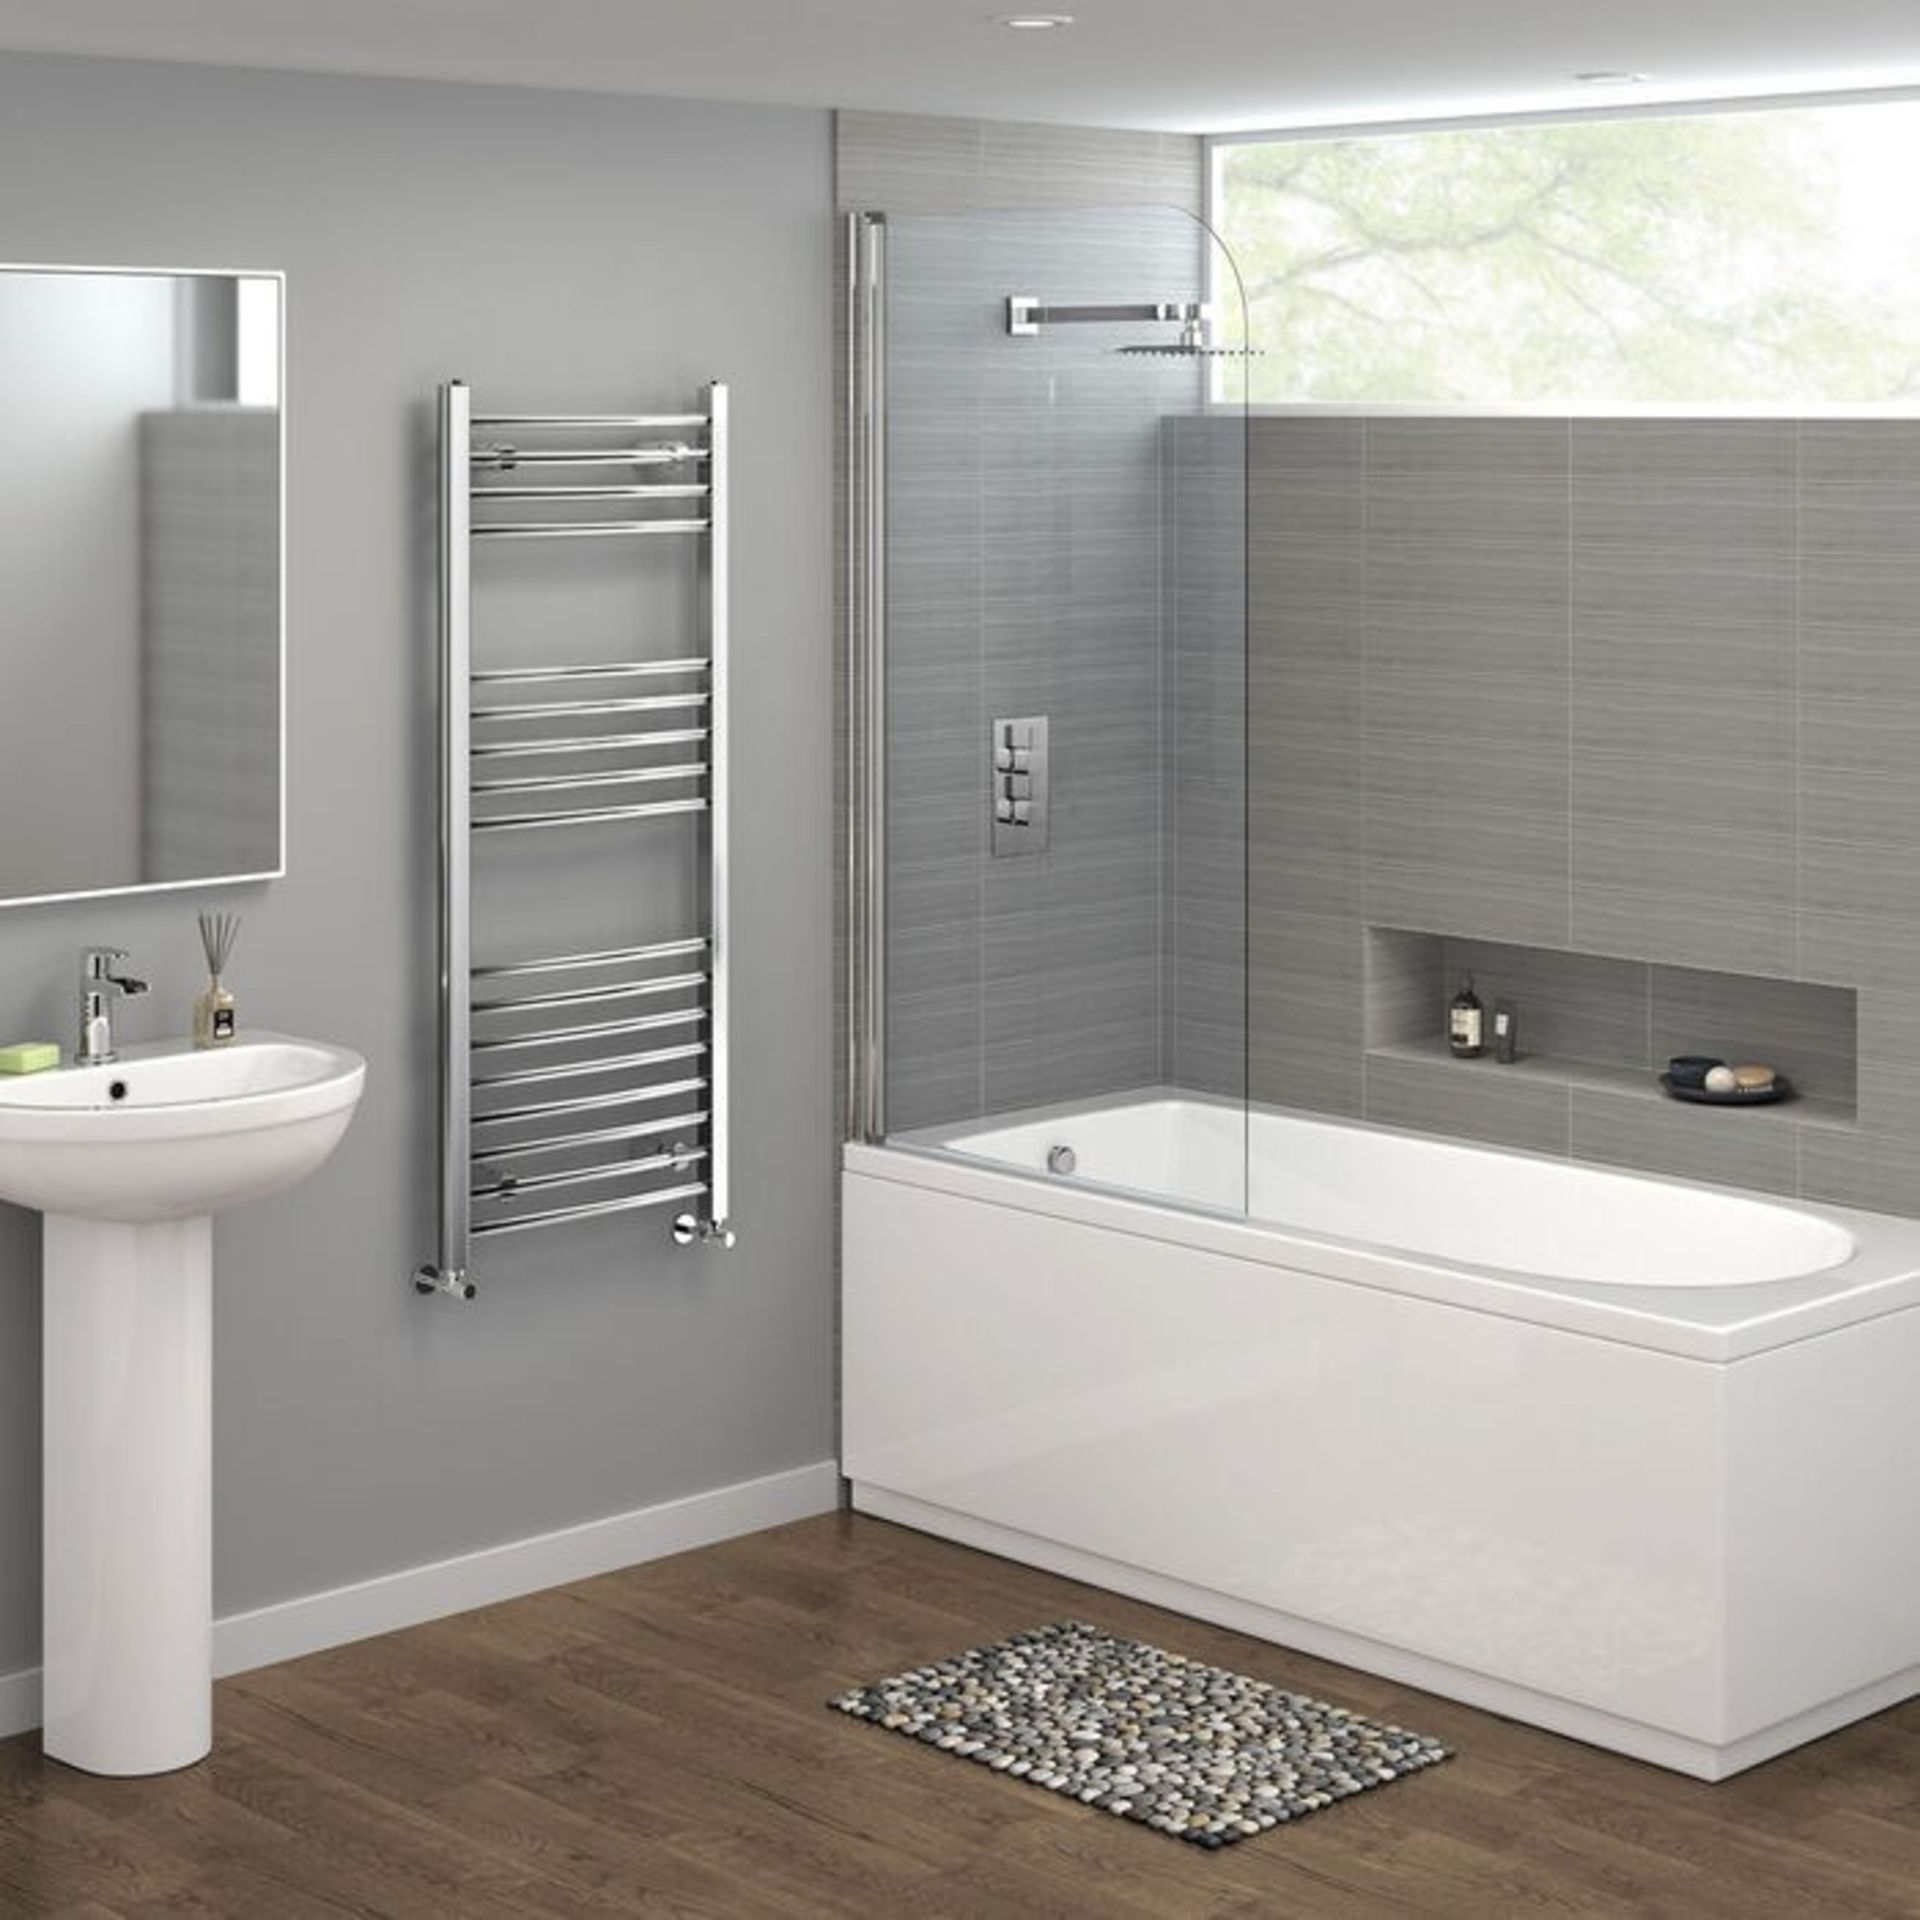 (HM140) 1100x450mm - 20mm Tubes - Chrome Curved Rail Ladder Towel Radiator. RRP £259.99.Made f... - Image 2 of 3